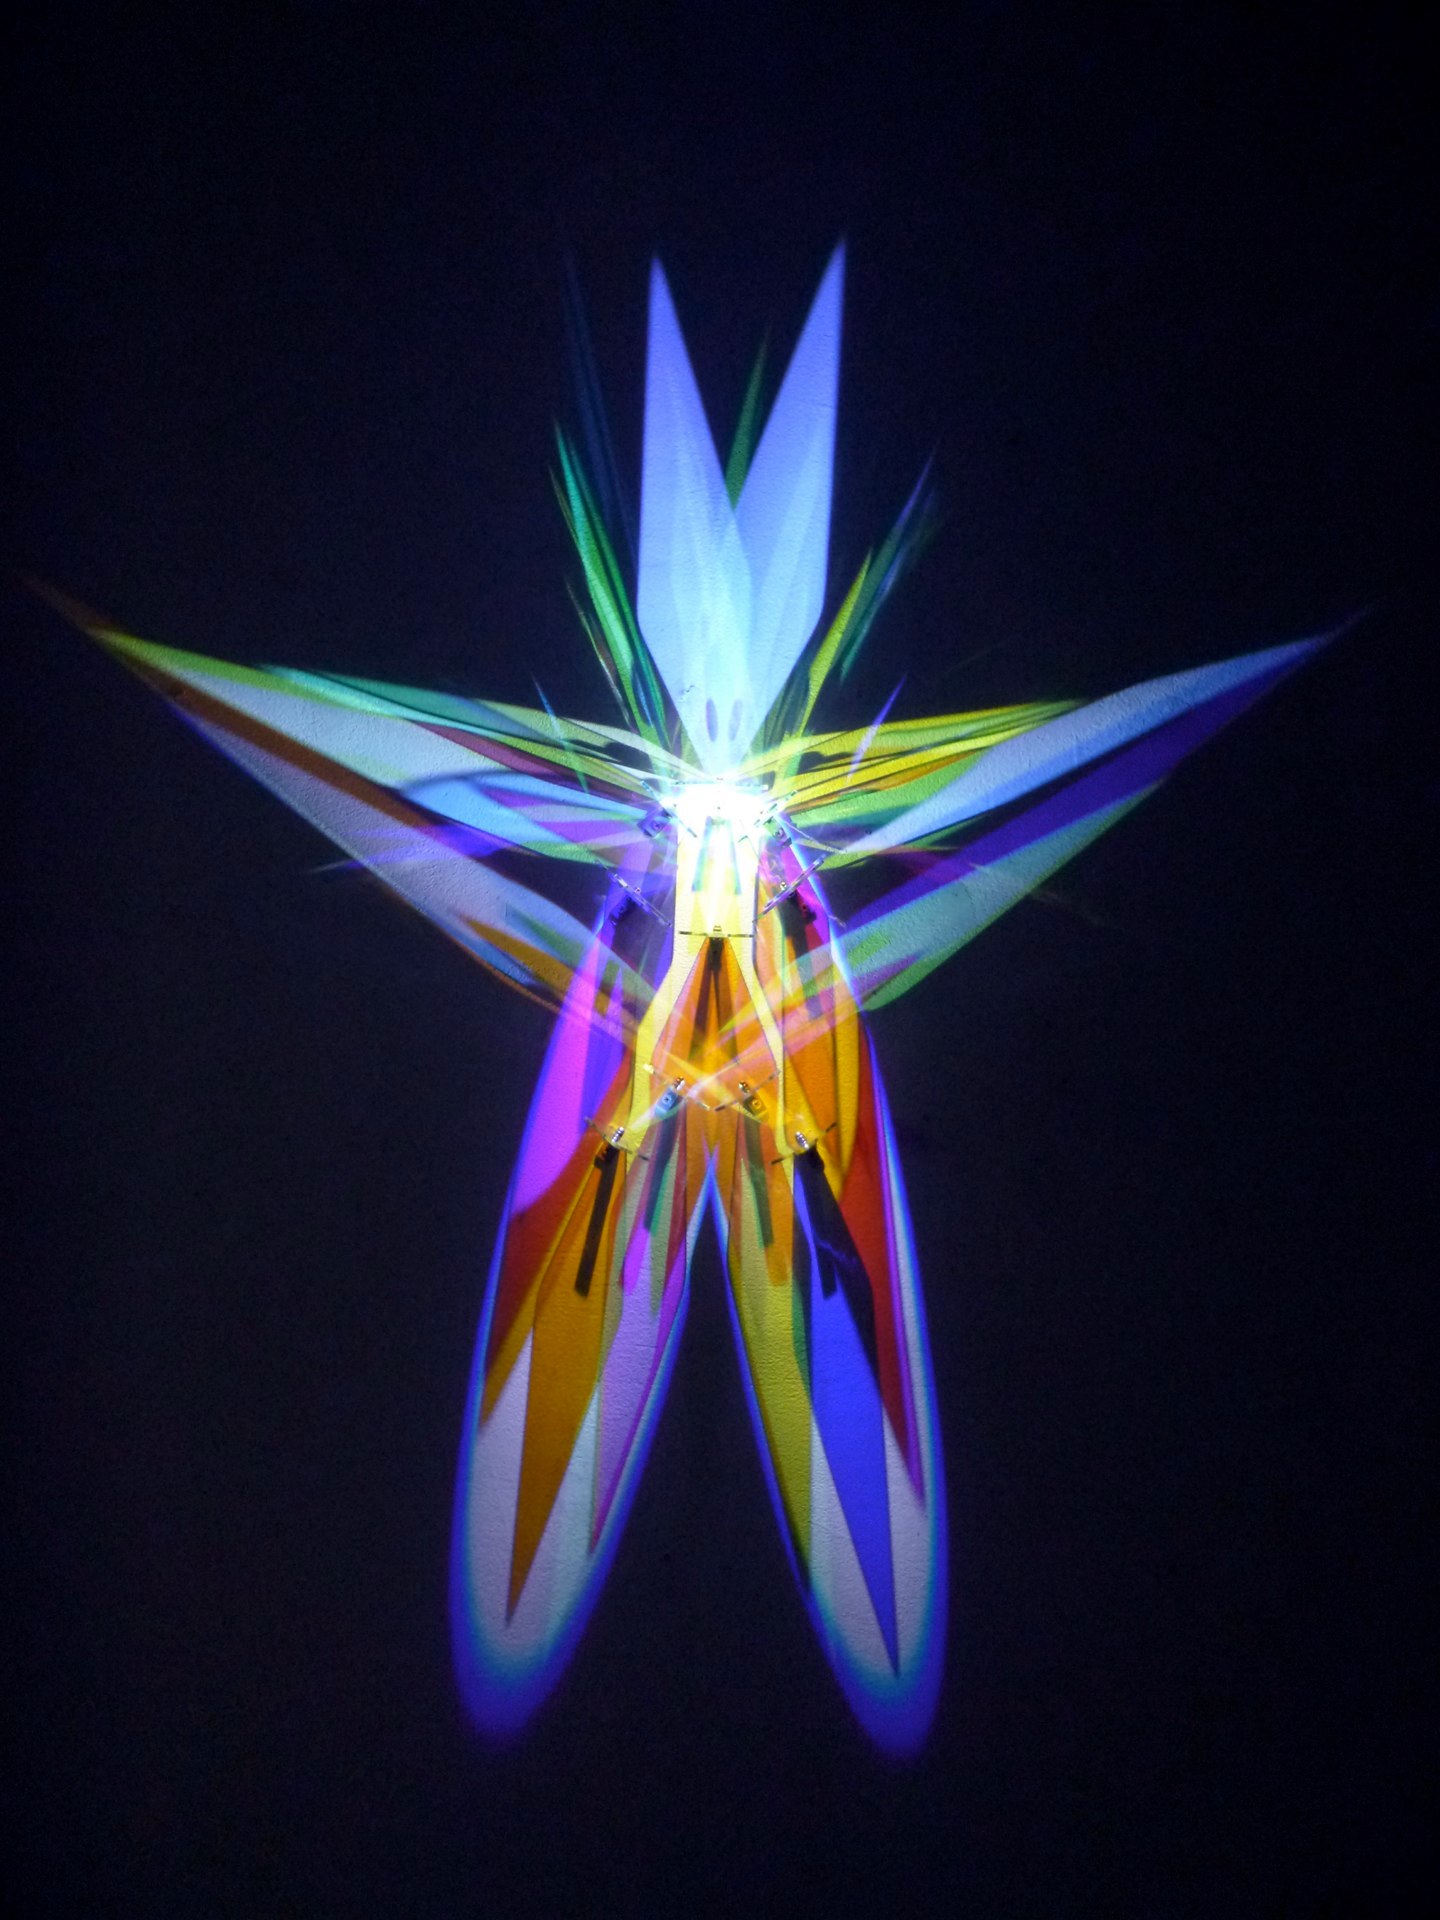 Cathy Cunningham-Little, "Transforming Isomer," 2015, glass, stainless steel, white LED, 52 x 48 x 4 inches